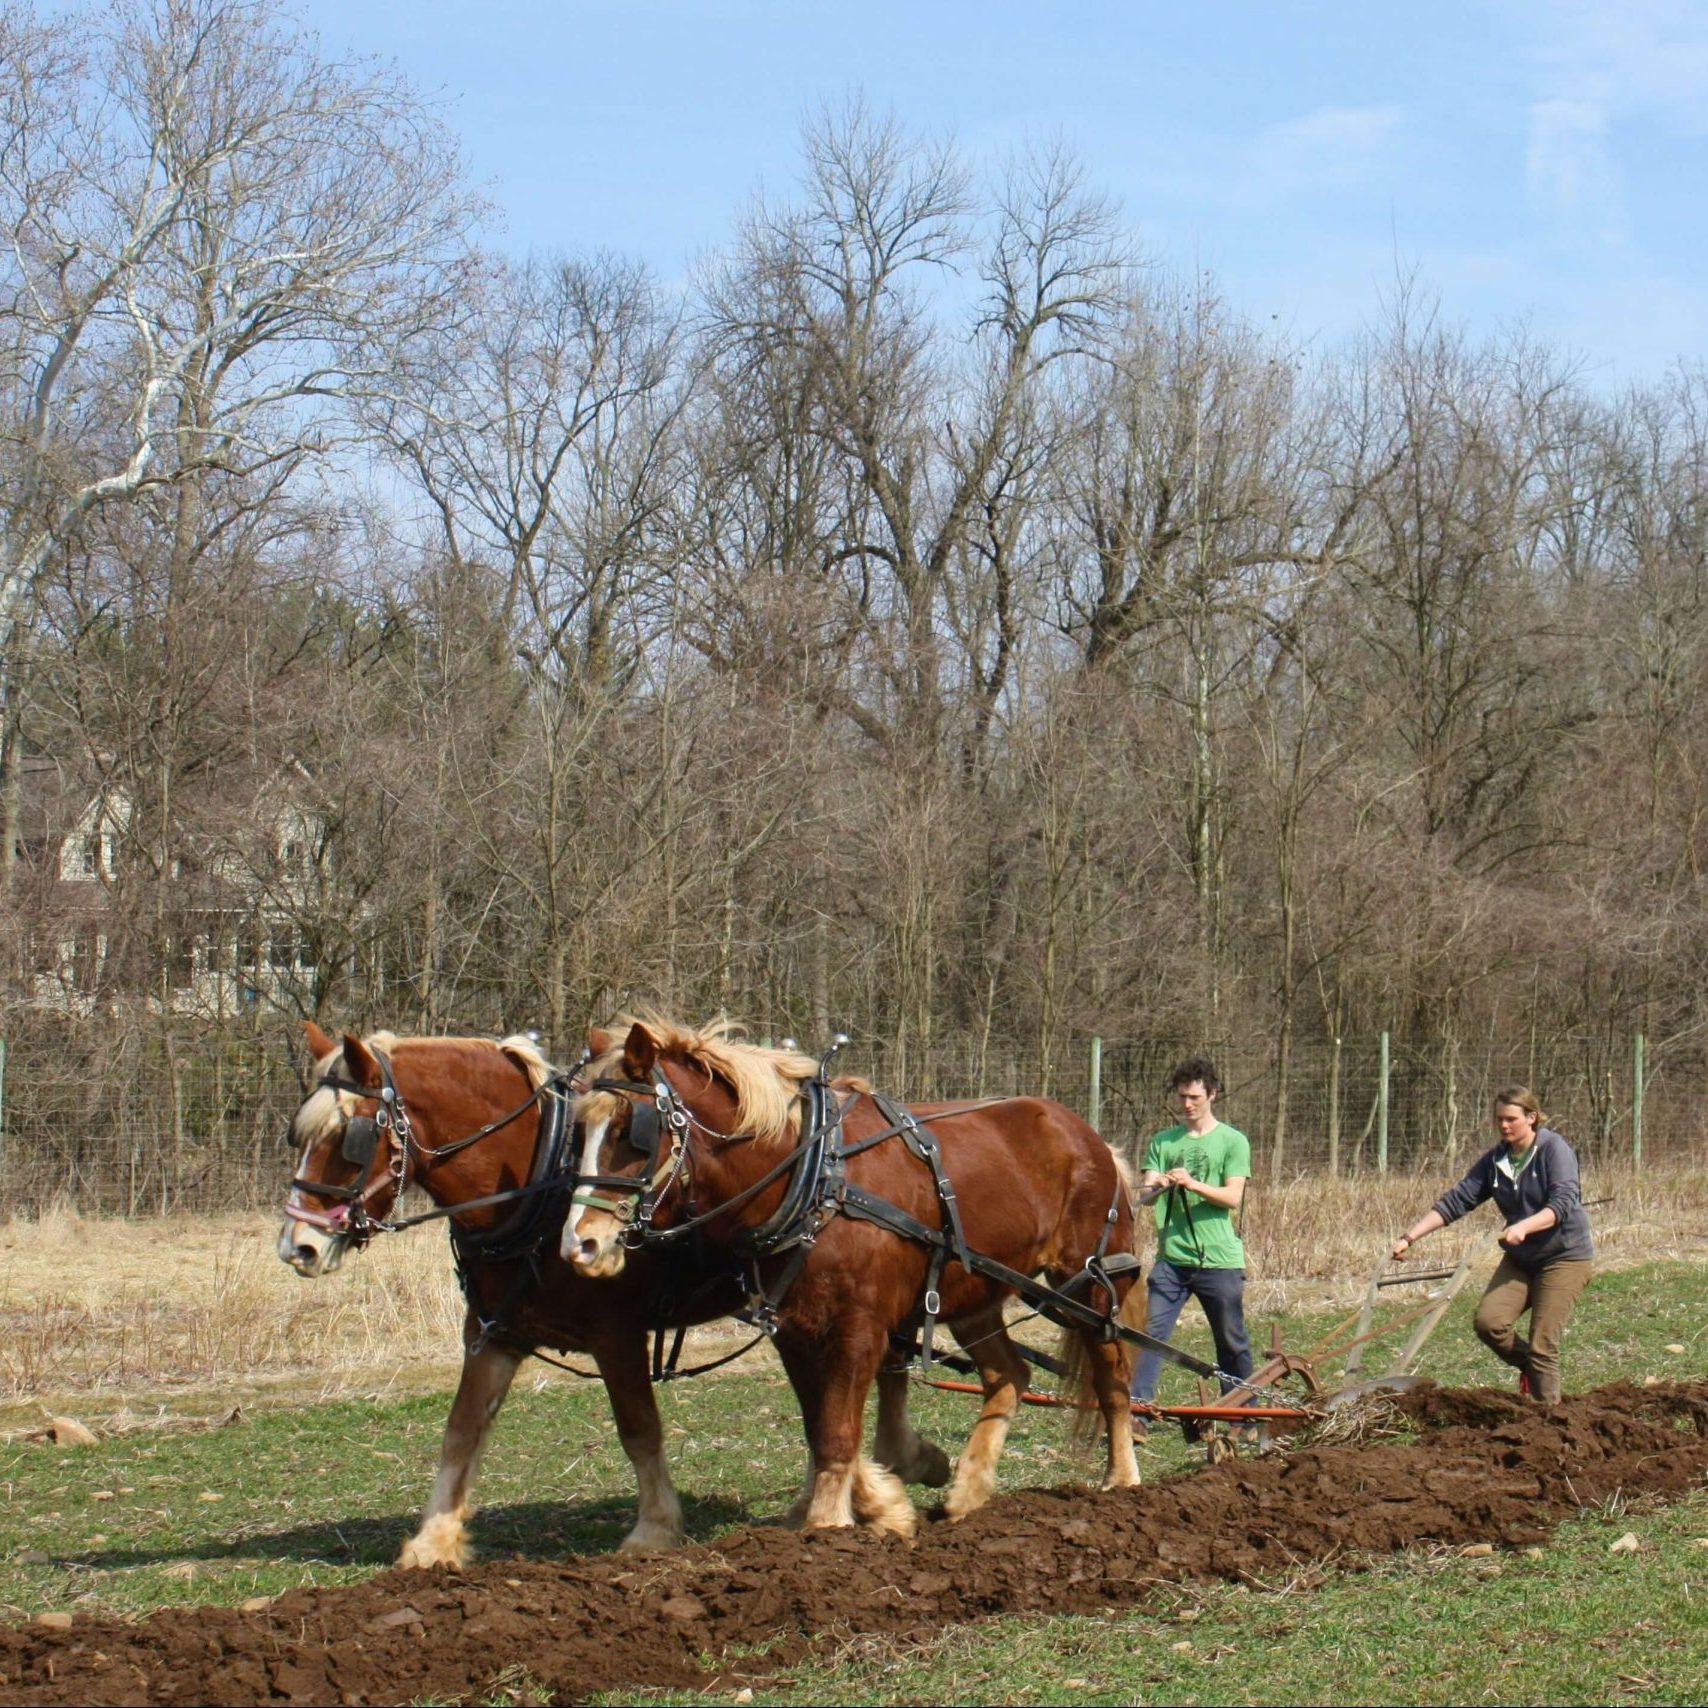 Two people in a fenced field walking behind a pair of draft horses plowing a field. There is a house behind some trees, which do not have any leaves on them.